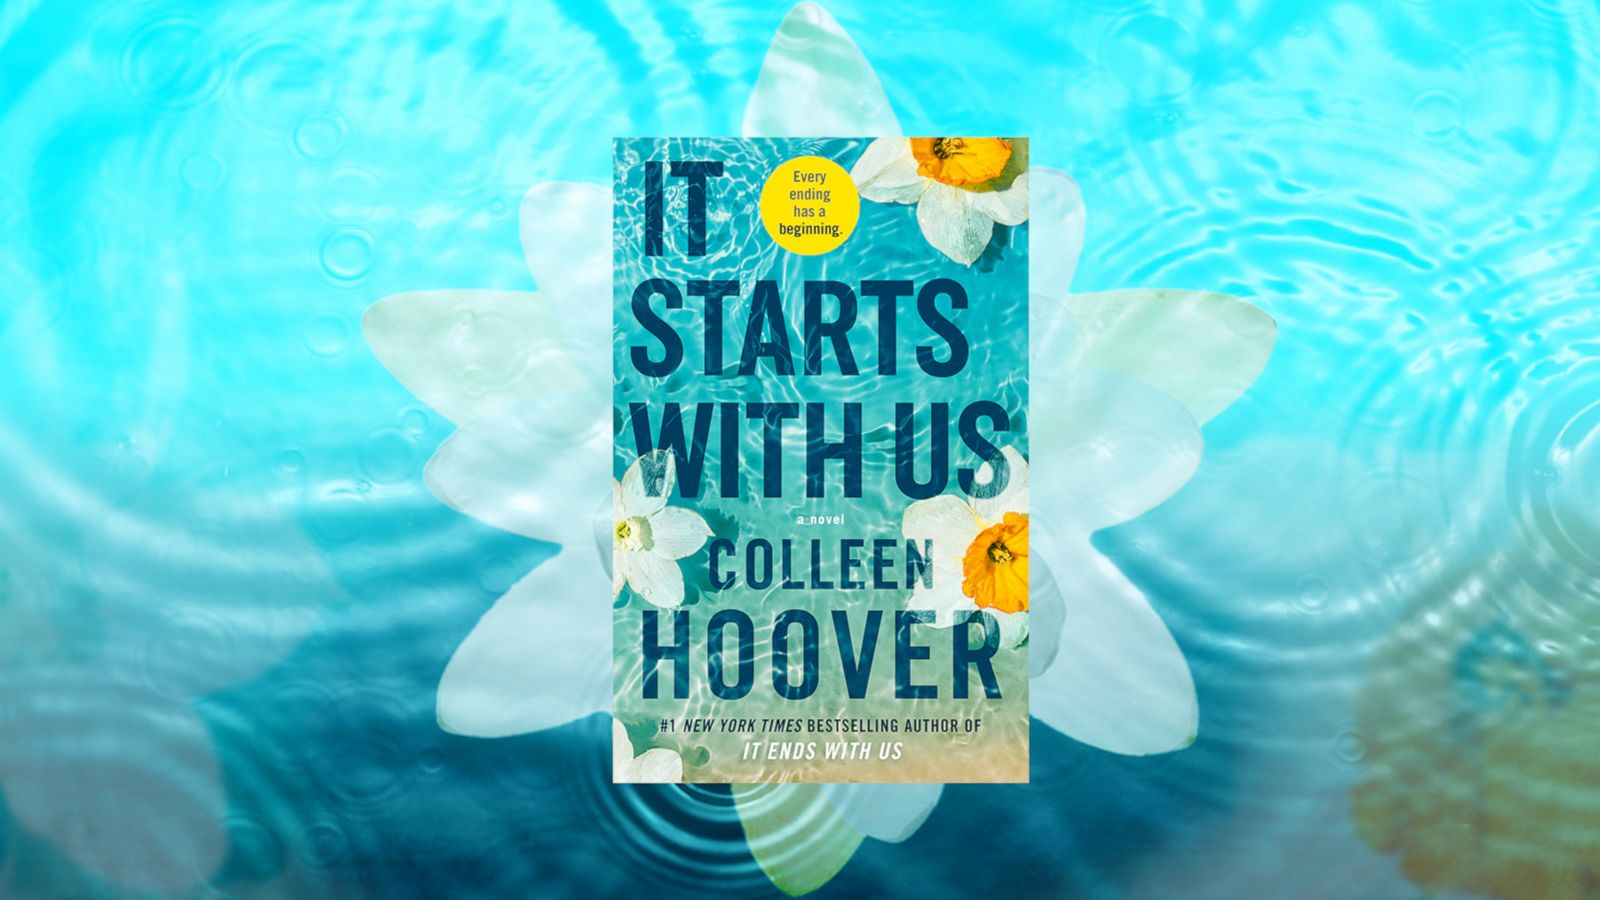 Exclusive 1st excerpt of Colleen Hoover's new book, 'It Starts with Us' -  Good Morning America